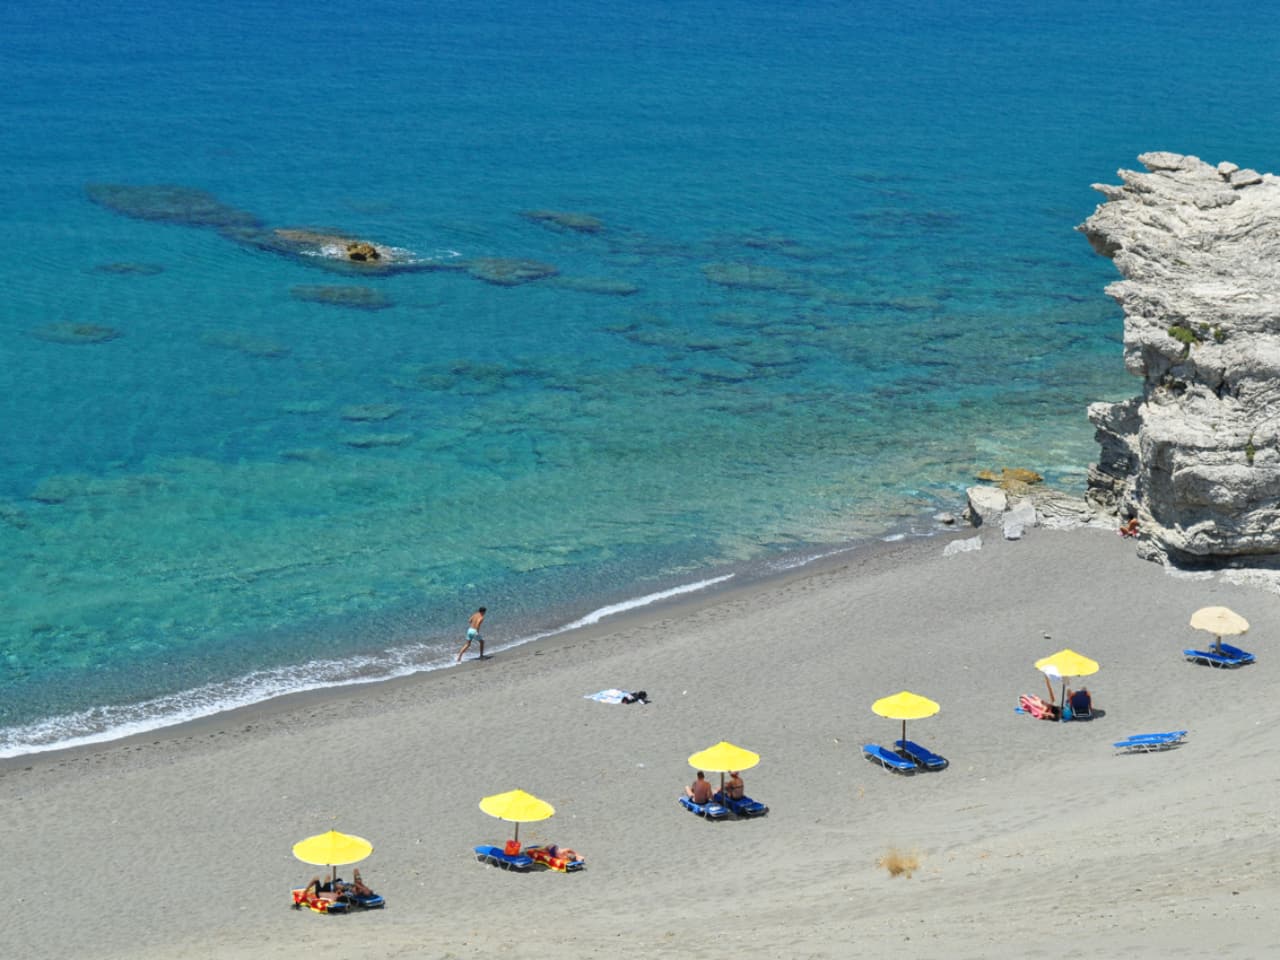 Head south for sunshine this autumn ... to Crete 